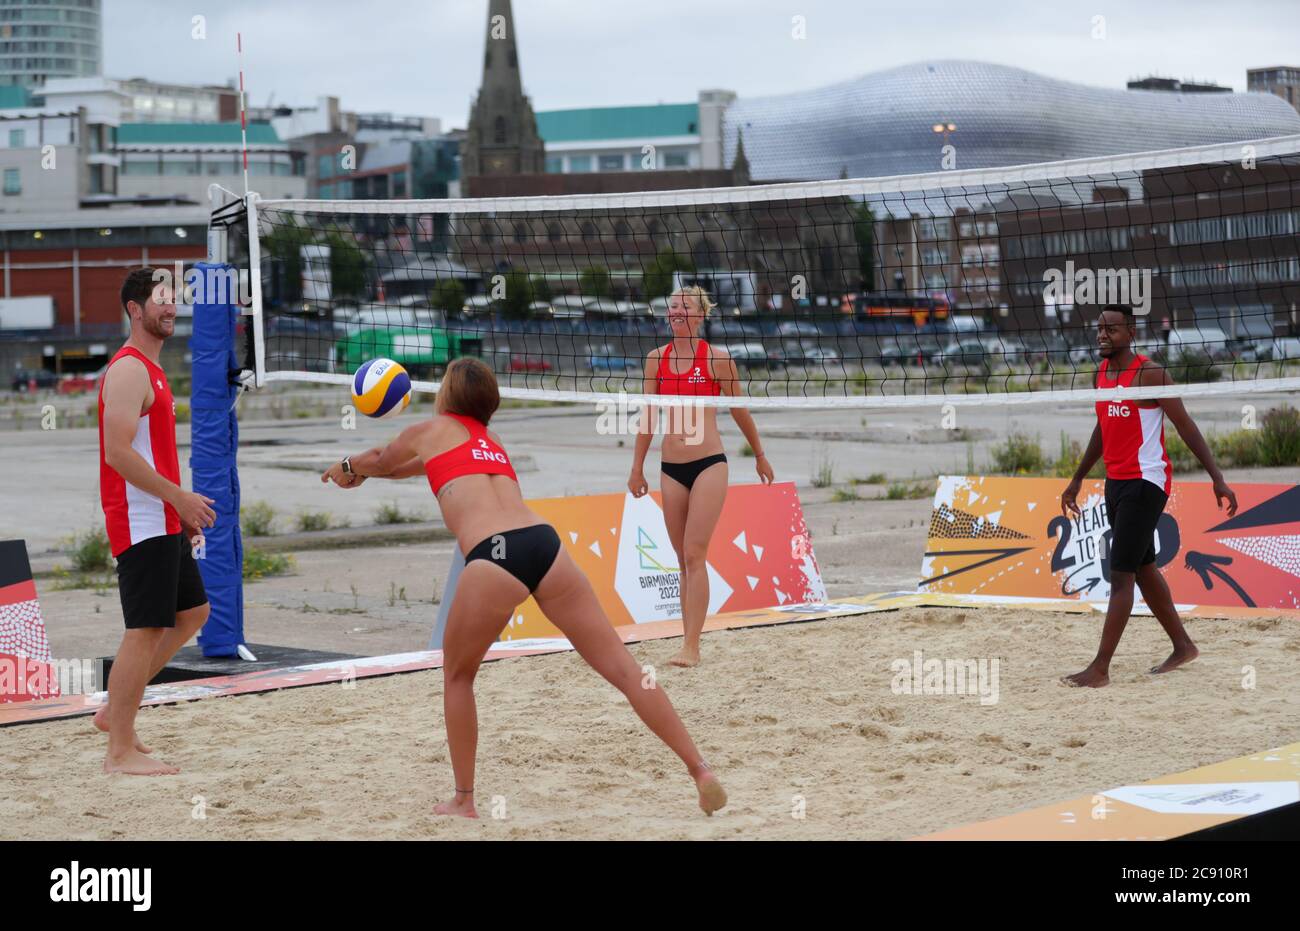 Team England players play beach volleyball during a demonstration at Smithfield, Birmingham City Centre. The Birmingham 2022 basketball and beach volleyball competitions will take place in the city centre location of Smithfield, Smithfield is the site of the former Birmingham Wholesale Market, which was cleared in 2018 and is the focus of a major regeneration plan. Stock Photo